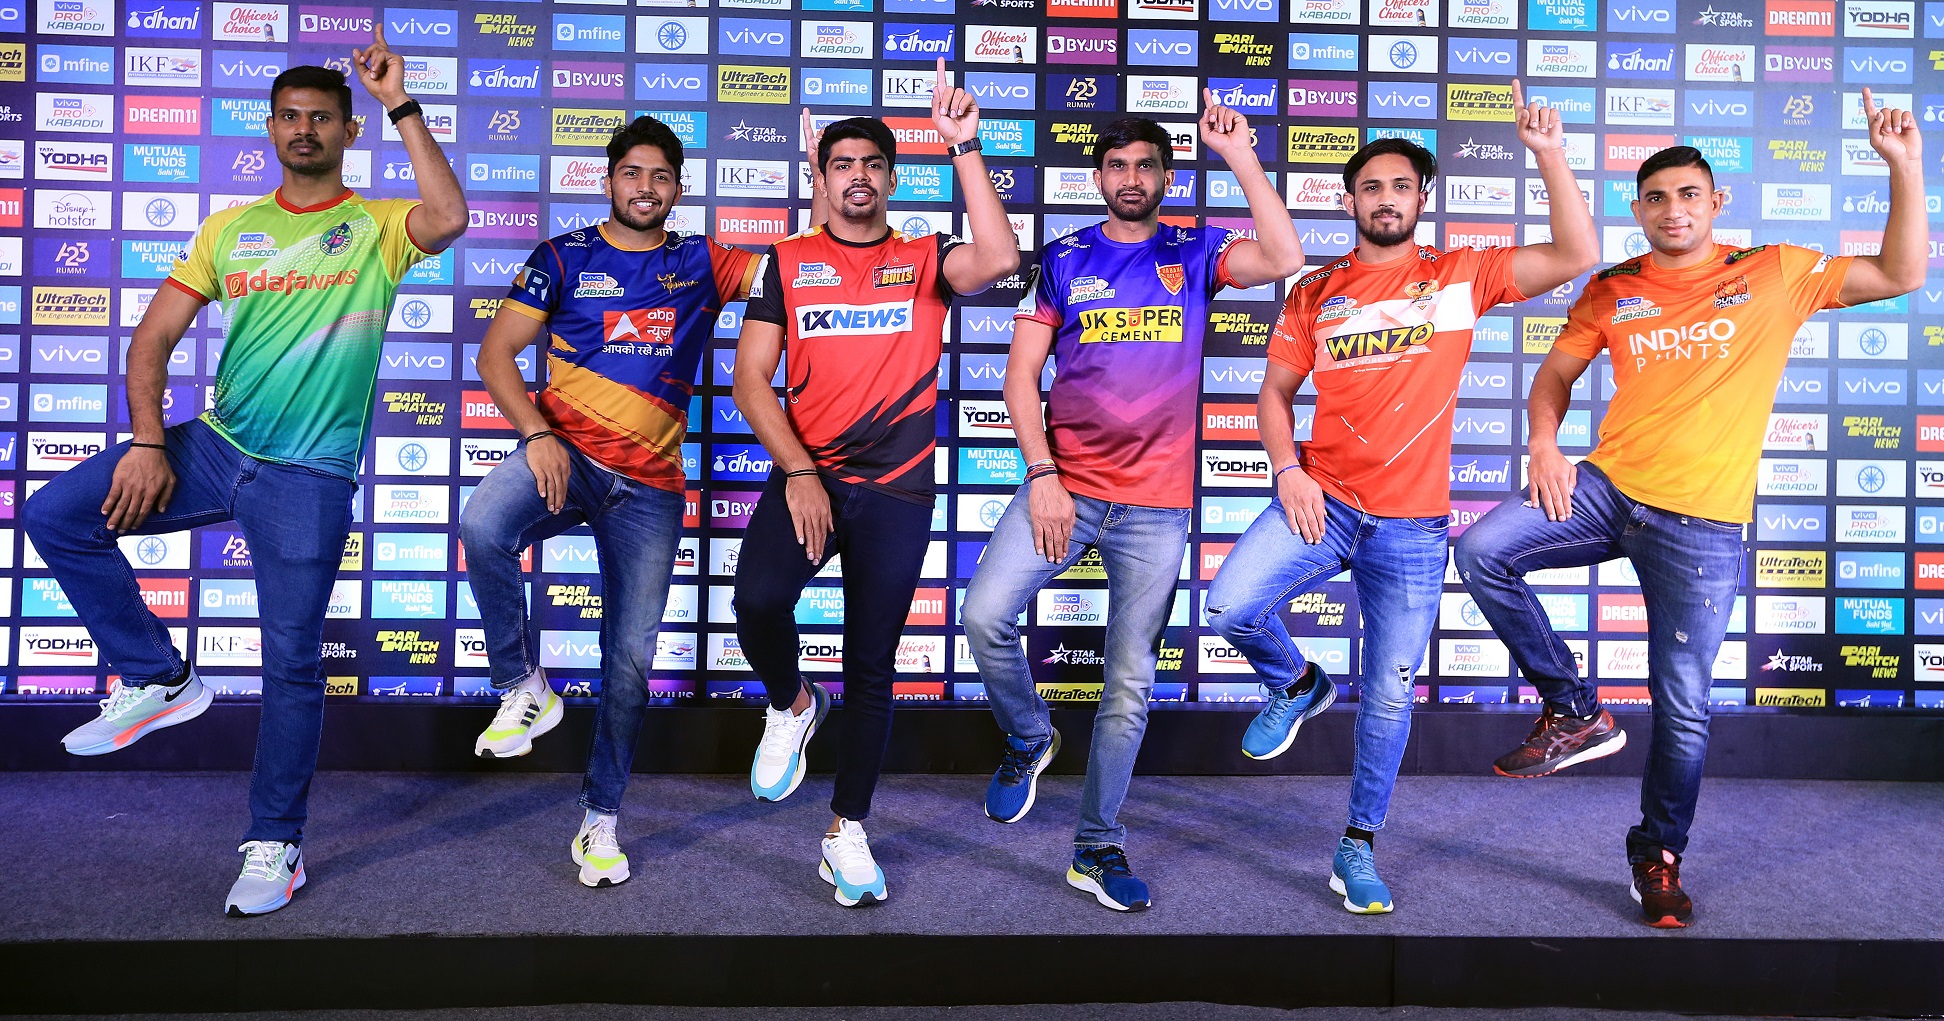 Pro Kabaddi Playoffs: Star Sports releases new promo video featuring Dhoni for the playoffs of Pro Kabaddi League Season 8 - Check Out